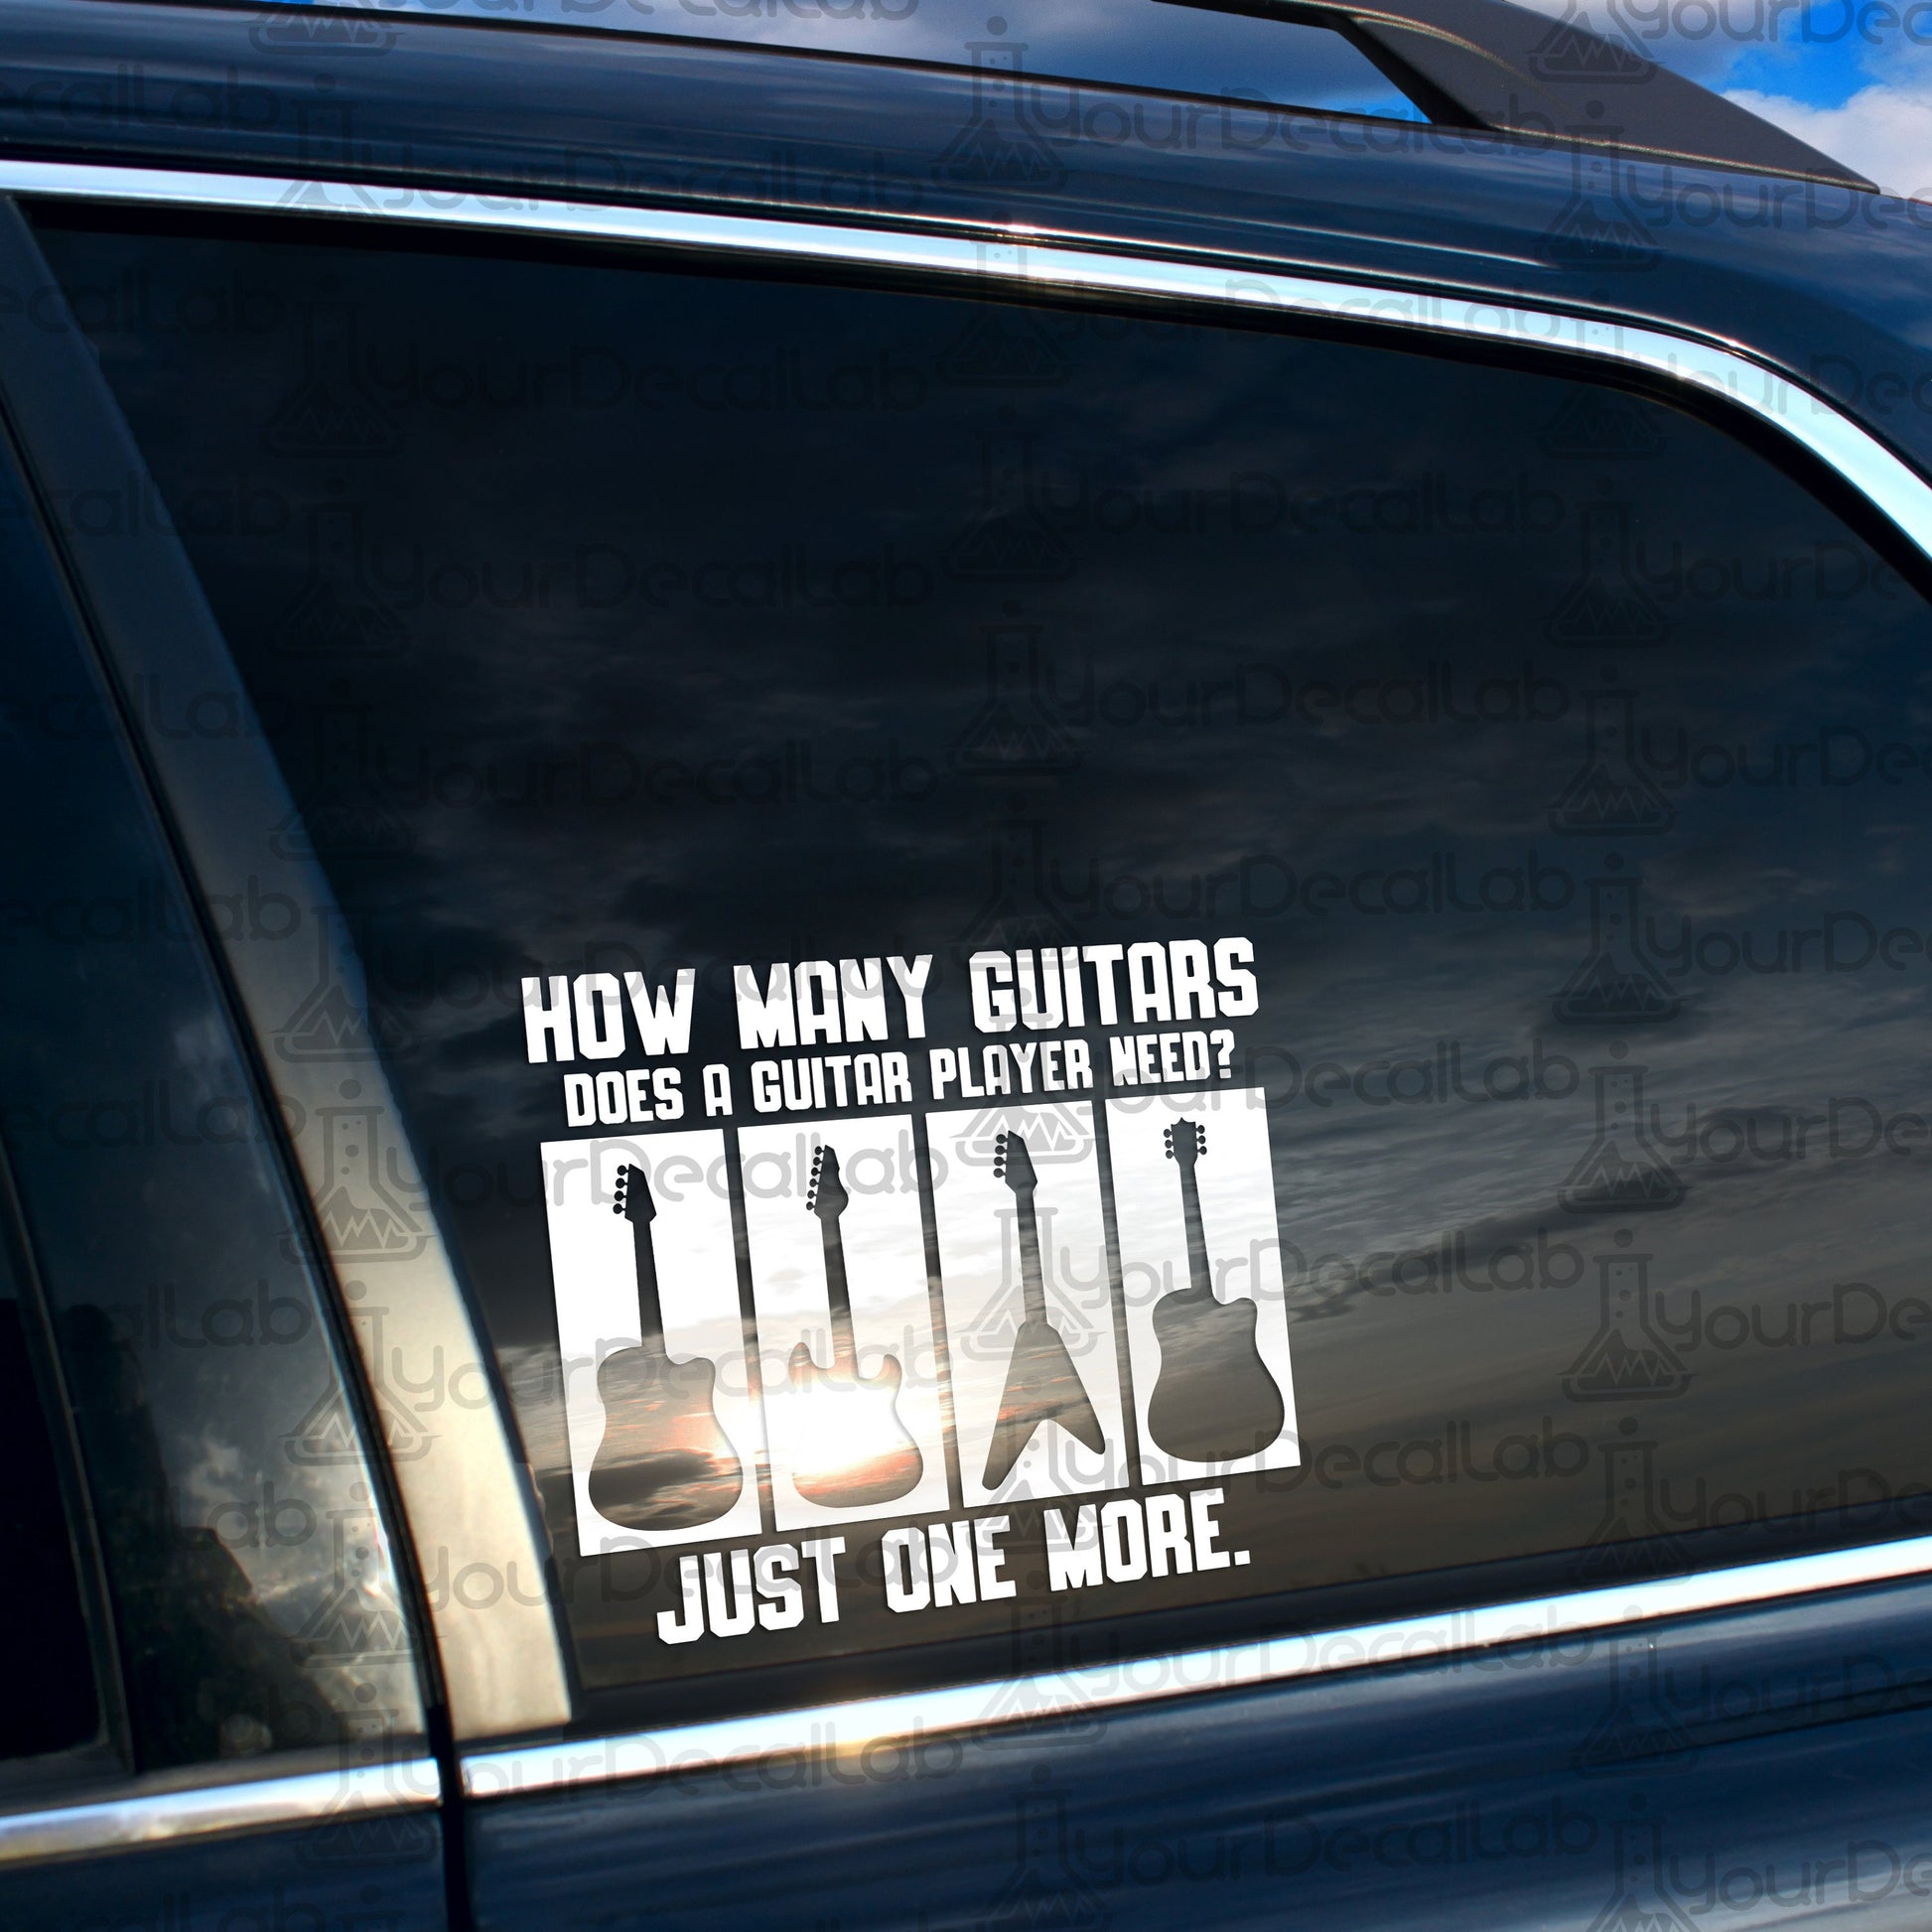 a car with a sticker that says how many guitars does a guitar player need